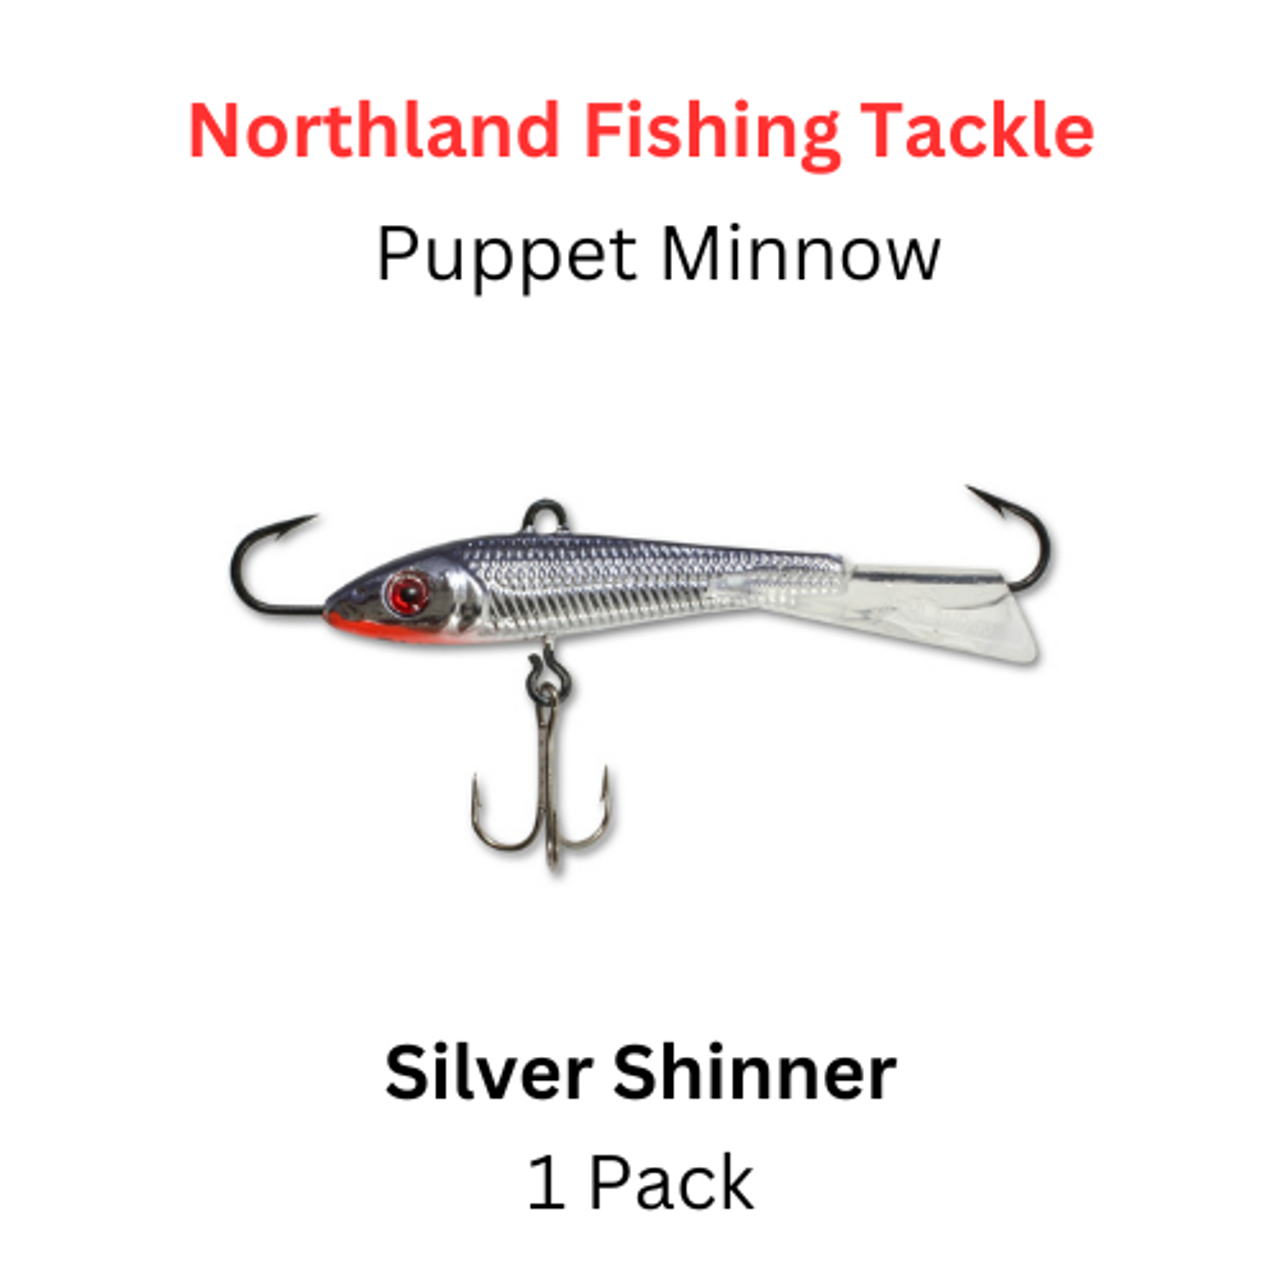 NORTHLAND FISHING TACKLE: 9/16 oz Puppet Minnow SILVER SHINER